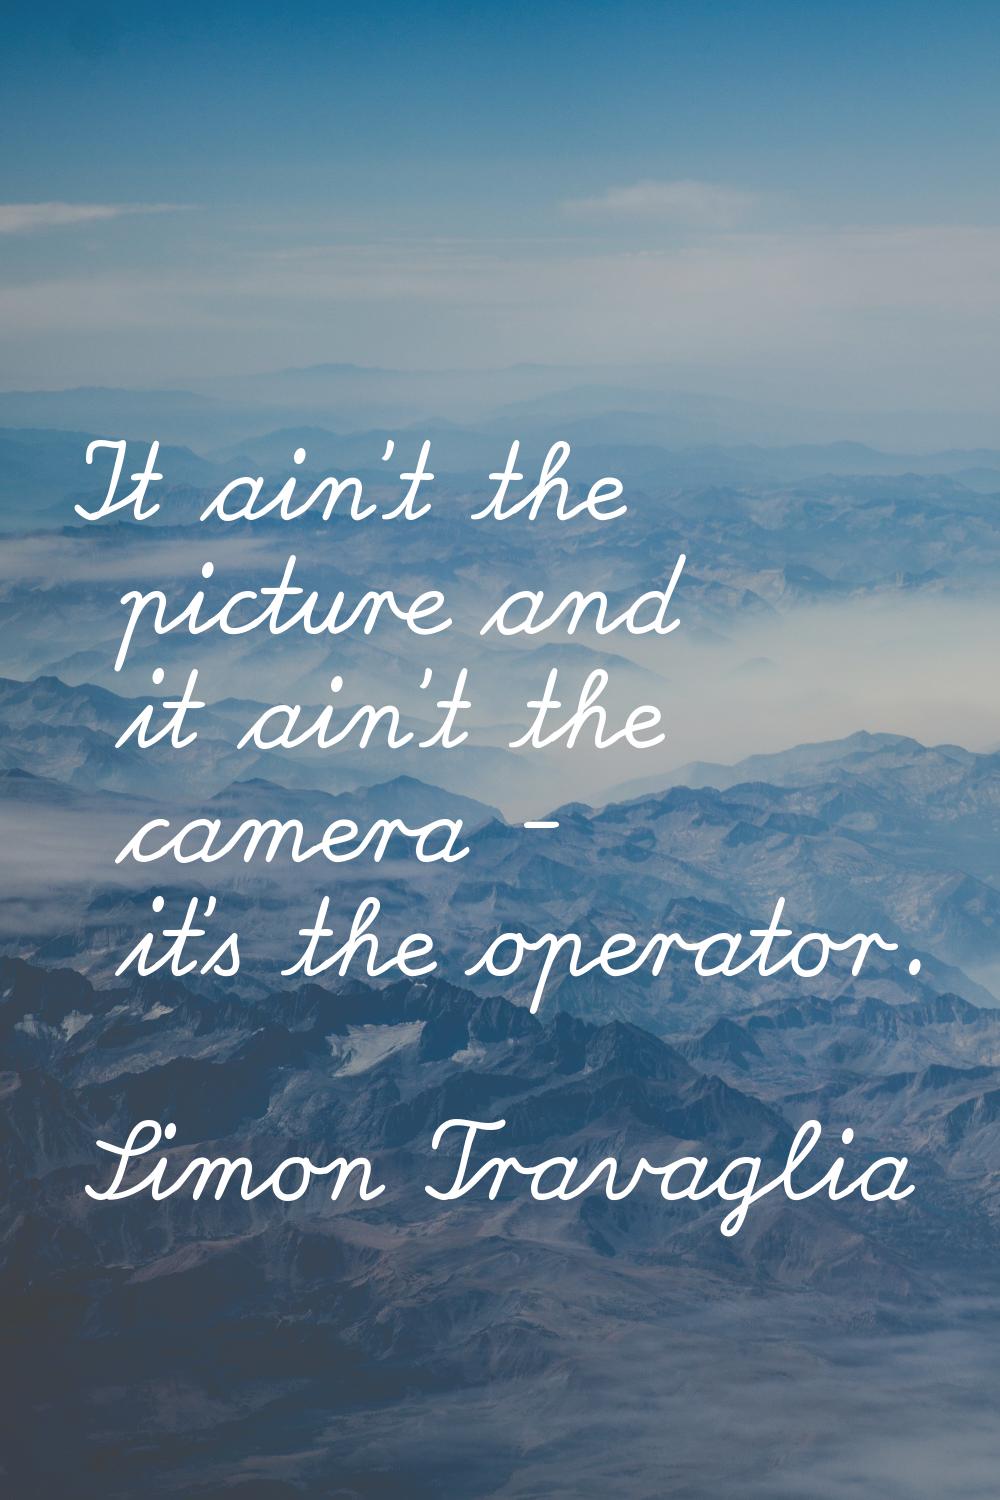 It ain't the picture and it ain't the camera - it's the operator.